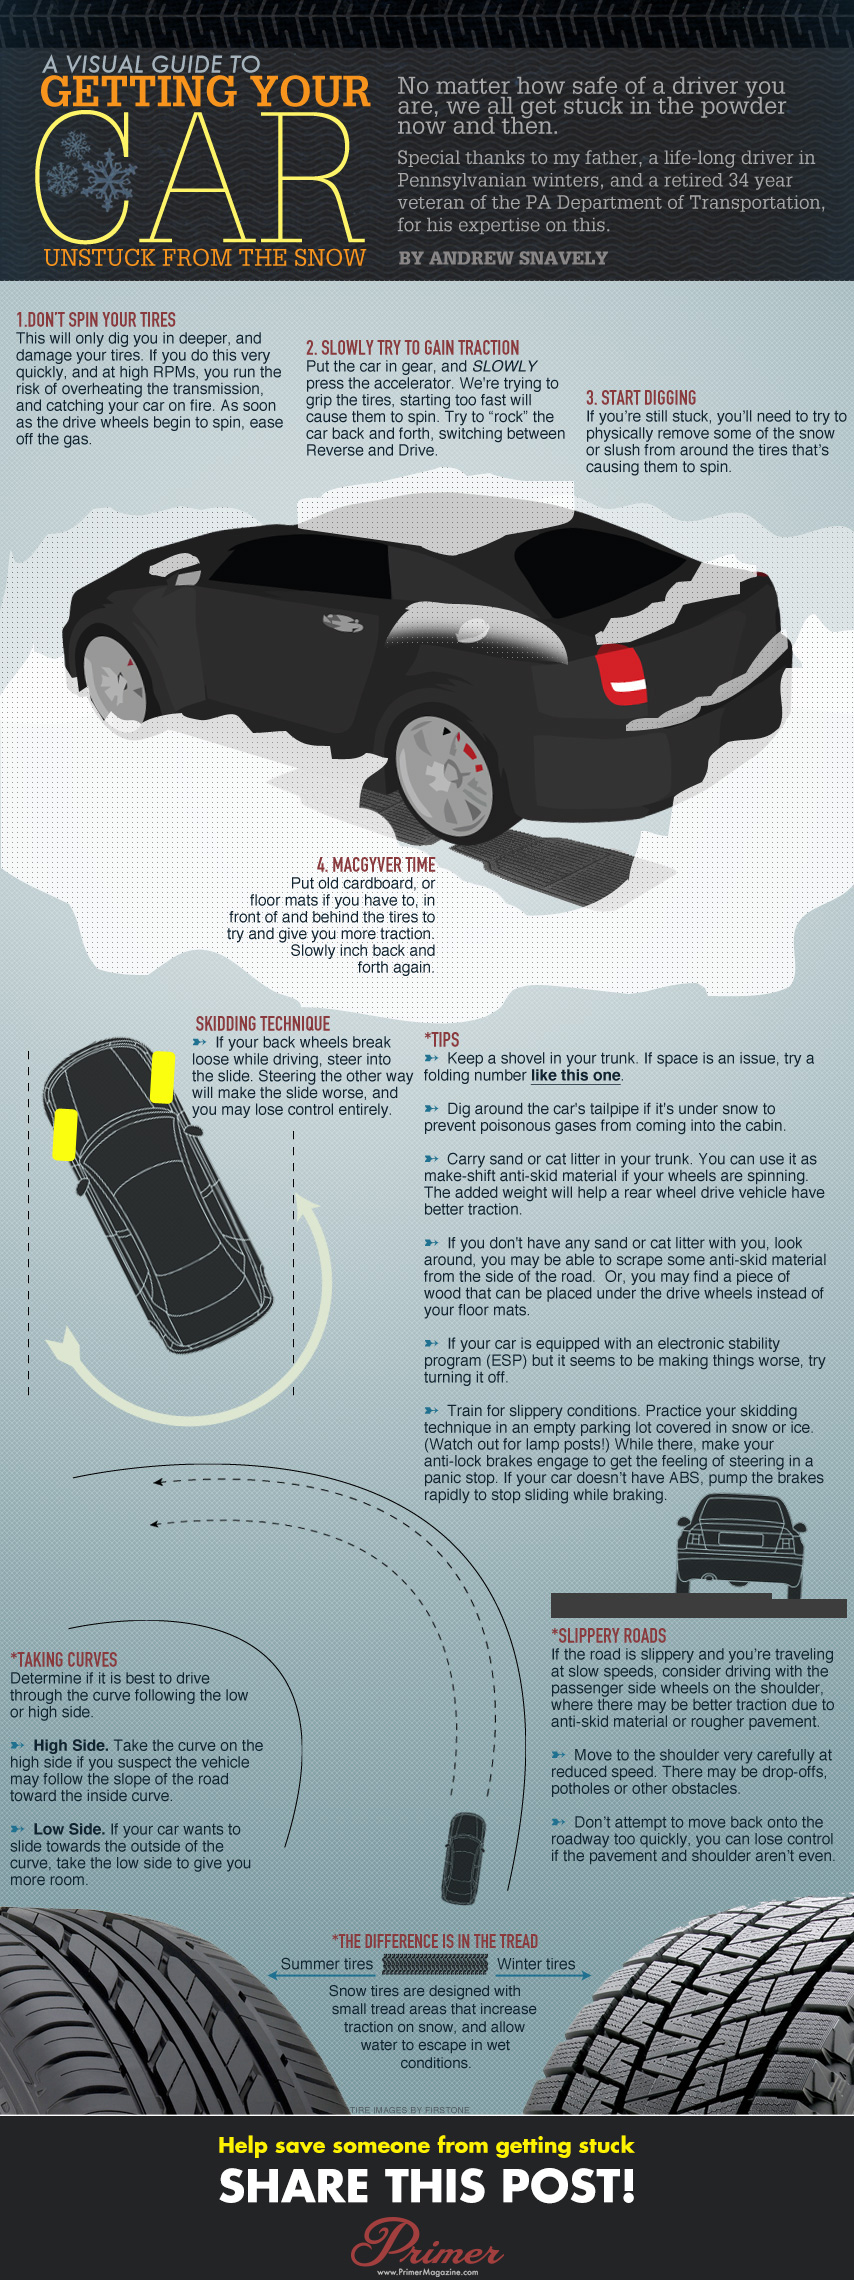 Getting Your Car unstuck from the snow infographic